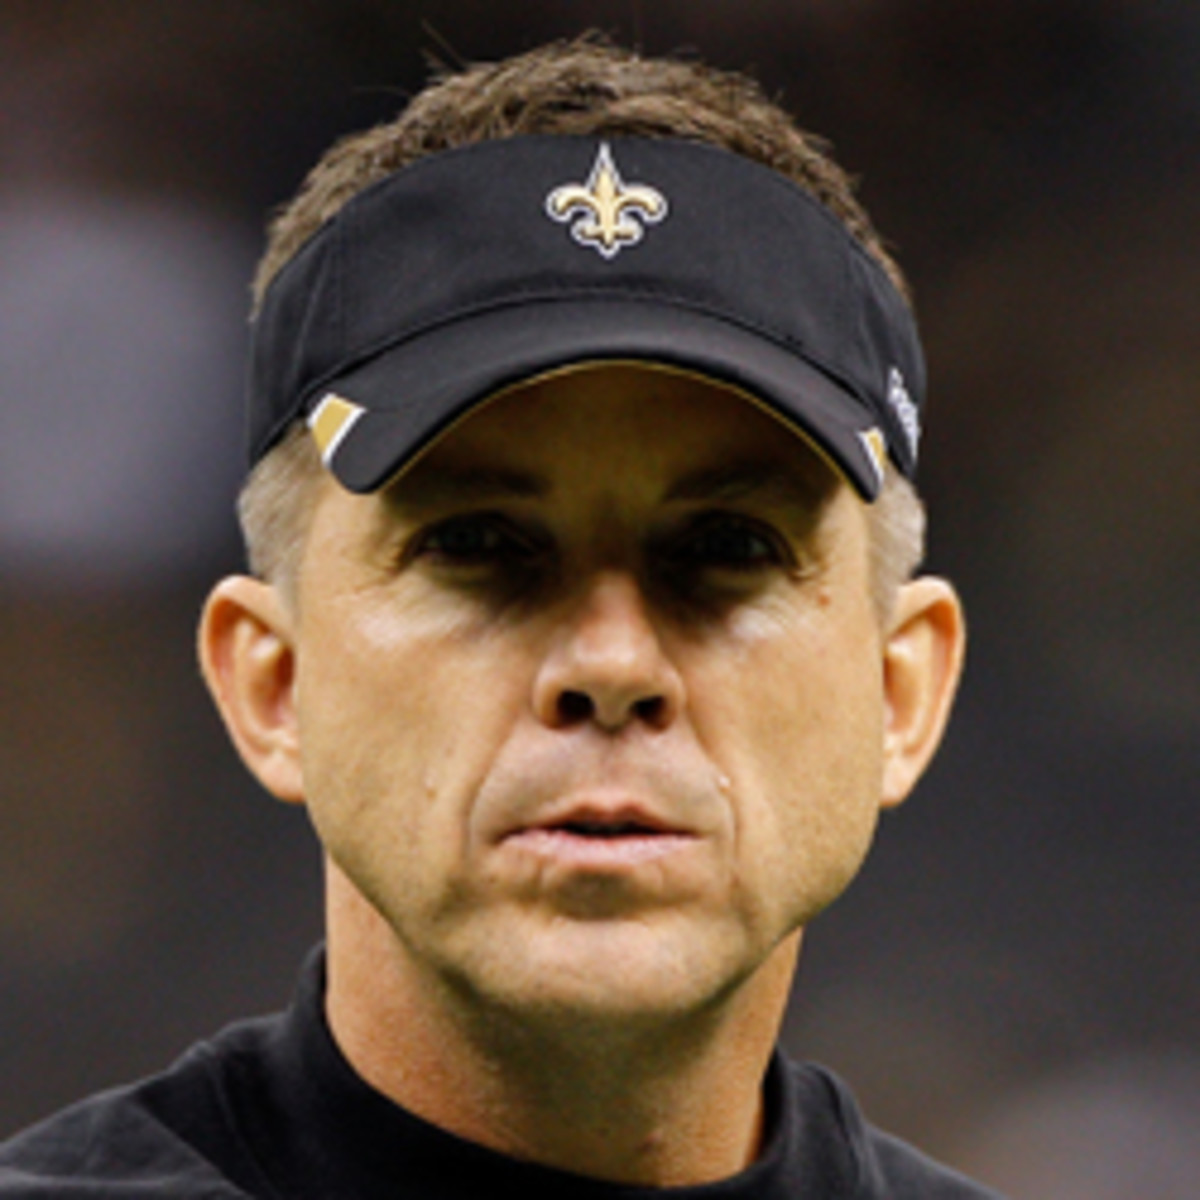 Sean Payton was reinstated by the NFL and can resume his duties as Saints head coach. (Chris Graythen/Getty Images)